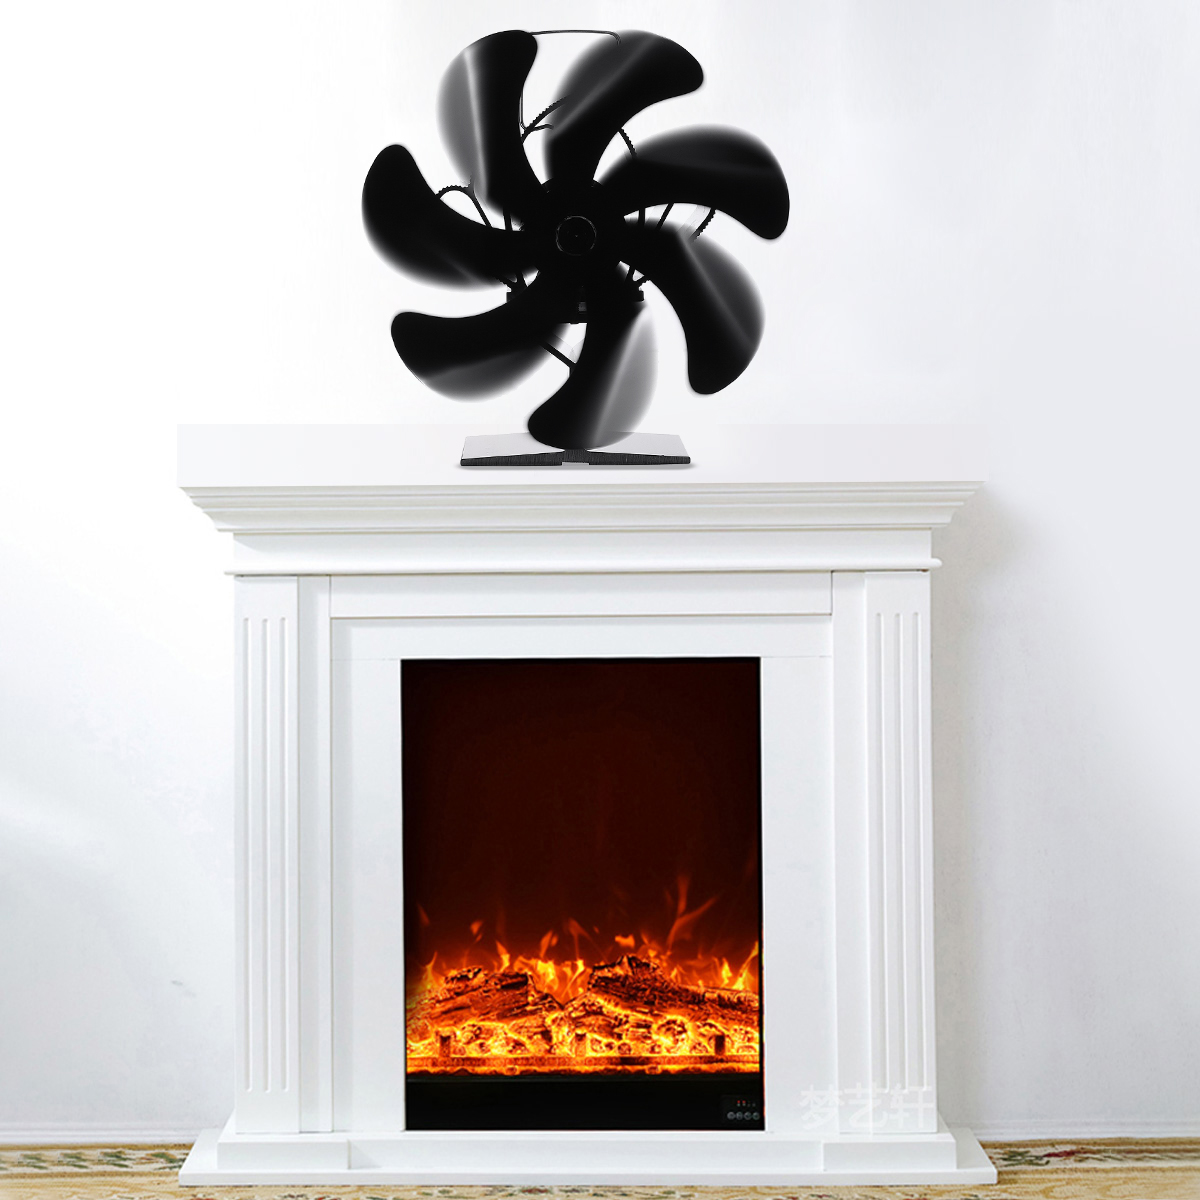 Fireplace-7-Blades-Heat-Powered-Stove-Fan-Self-Powered-Wood-Stove-Top-Burner-Fireplace-Silent-Eco-He-1888625-2